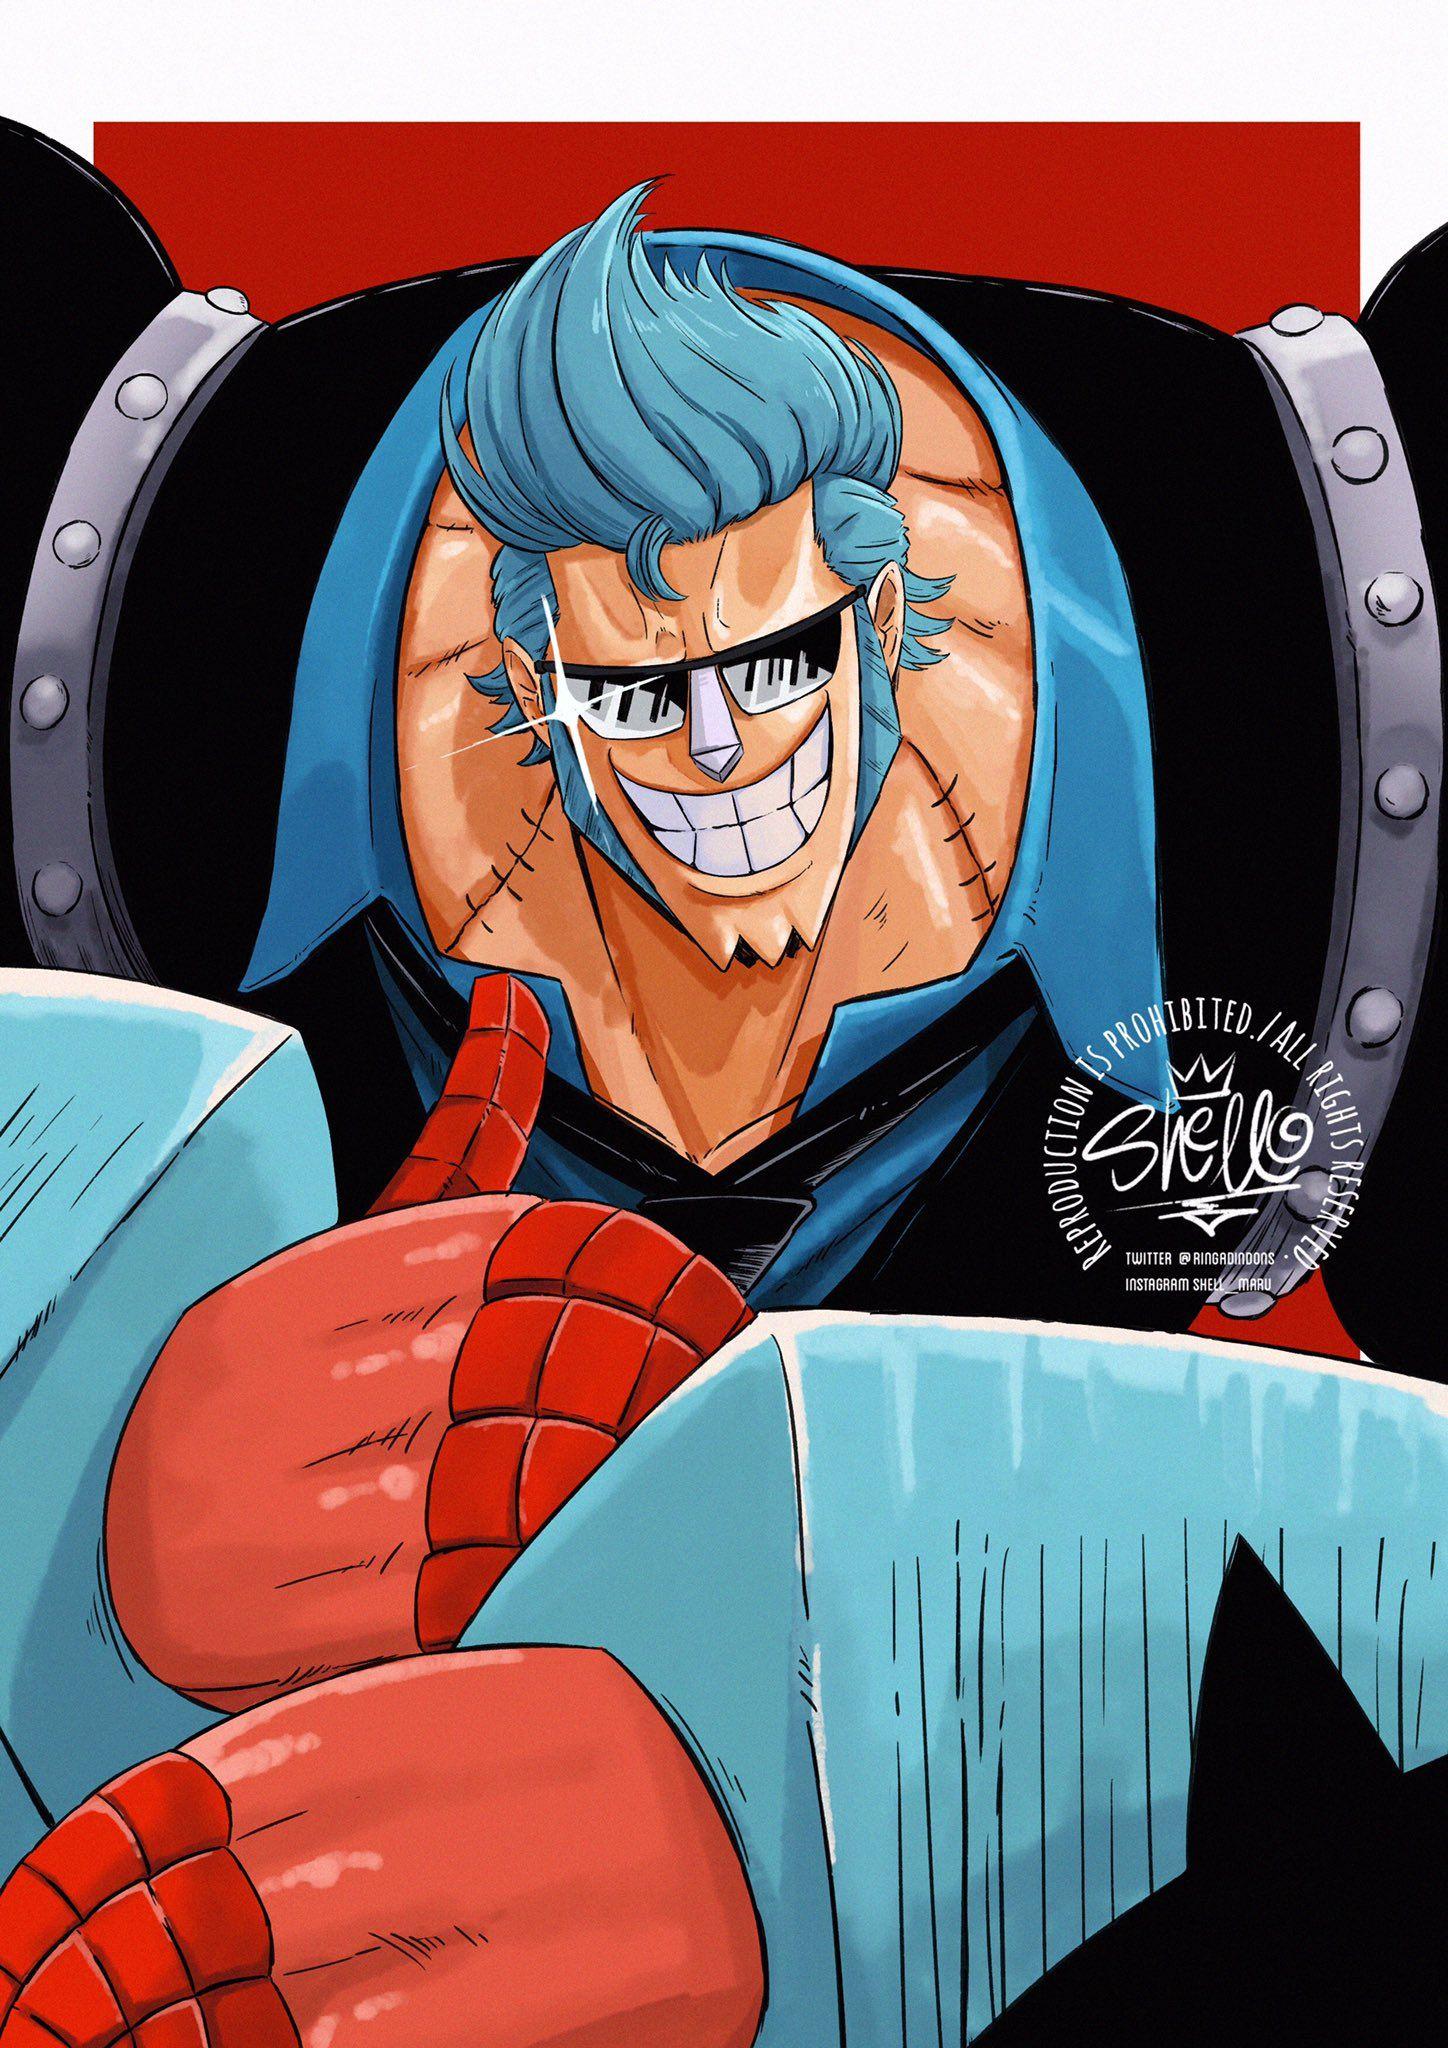 One Piece Franky Wallpapers Top Free One Piece Franky Backgrounds